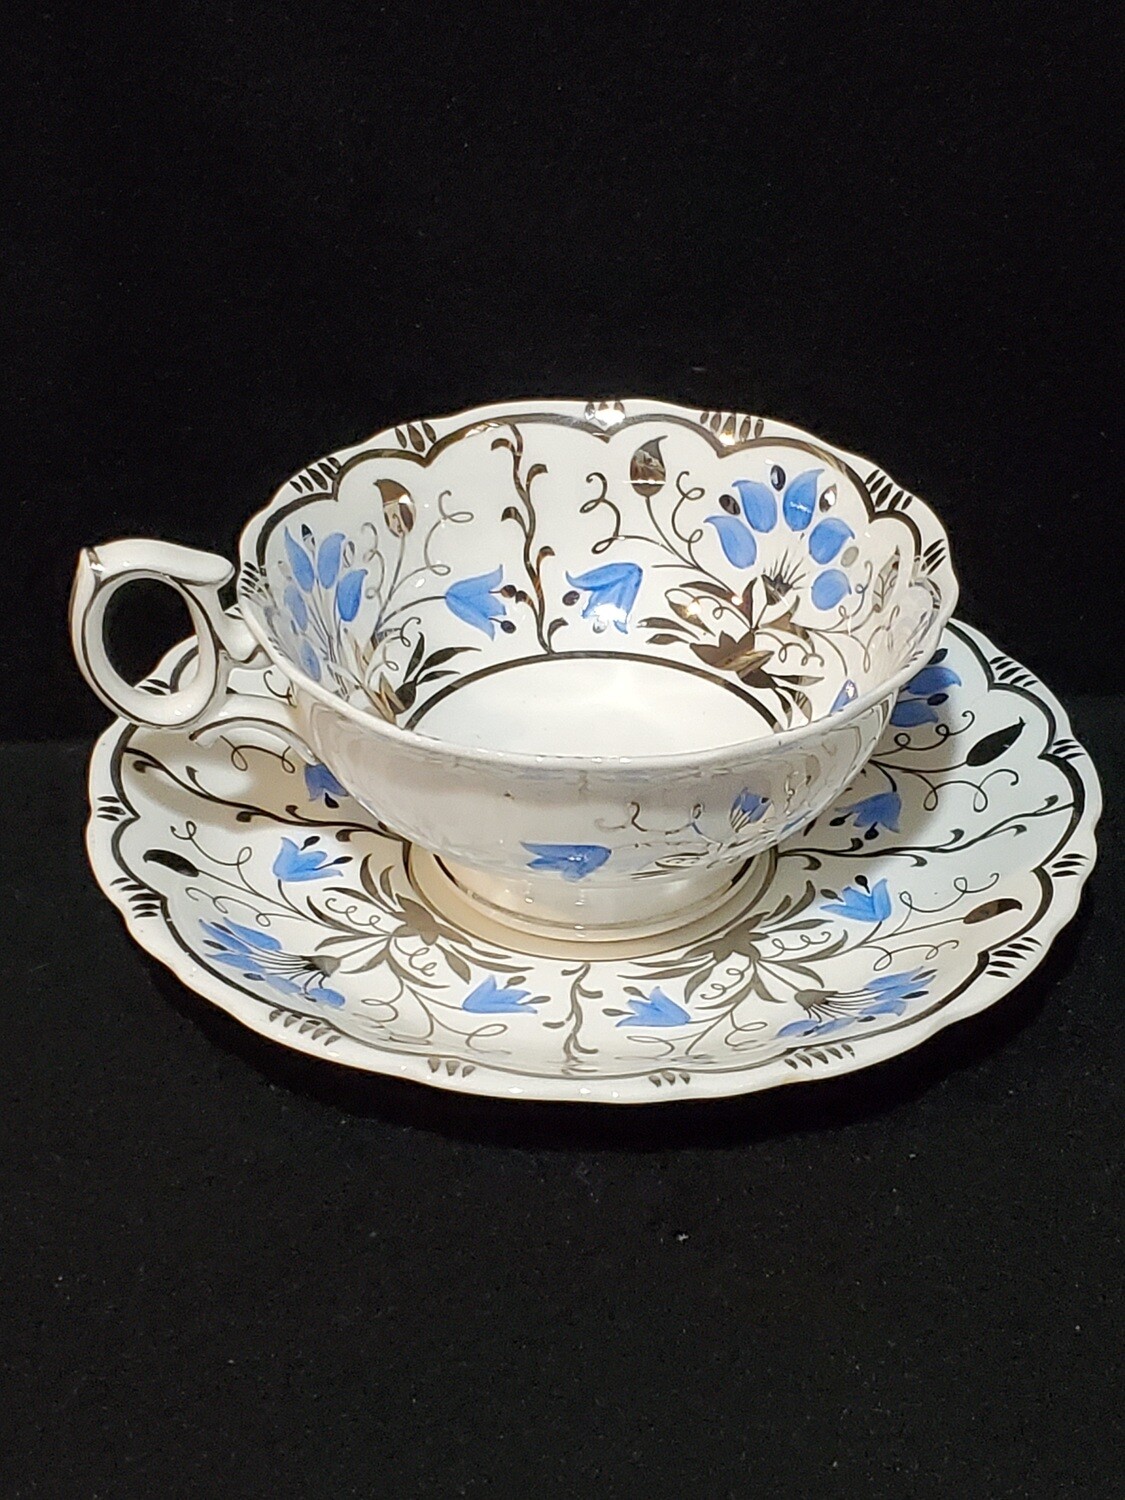 Wedgwood Bone China, Footed Cup & Saucer 2", Pattern # W3112